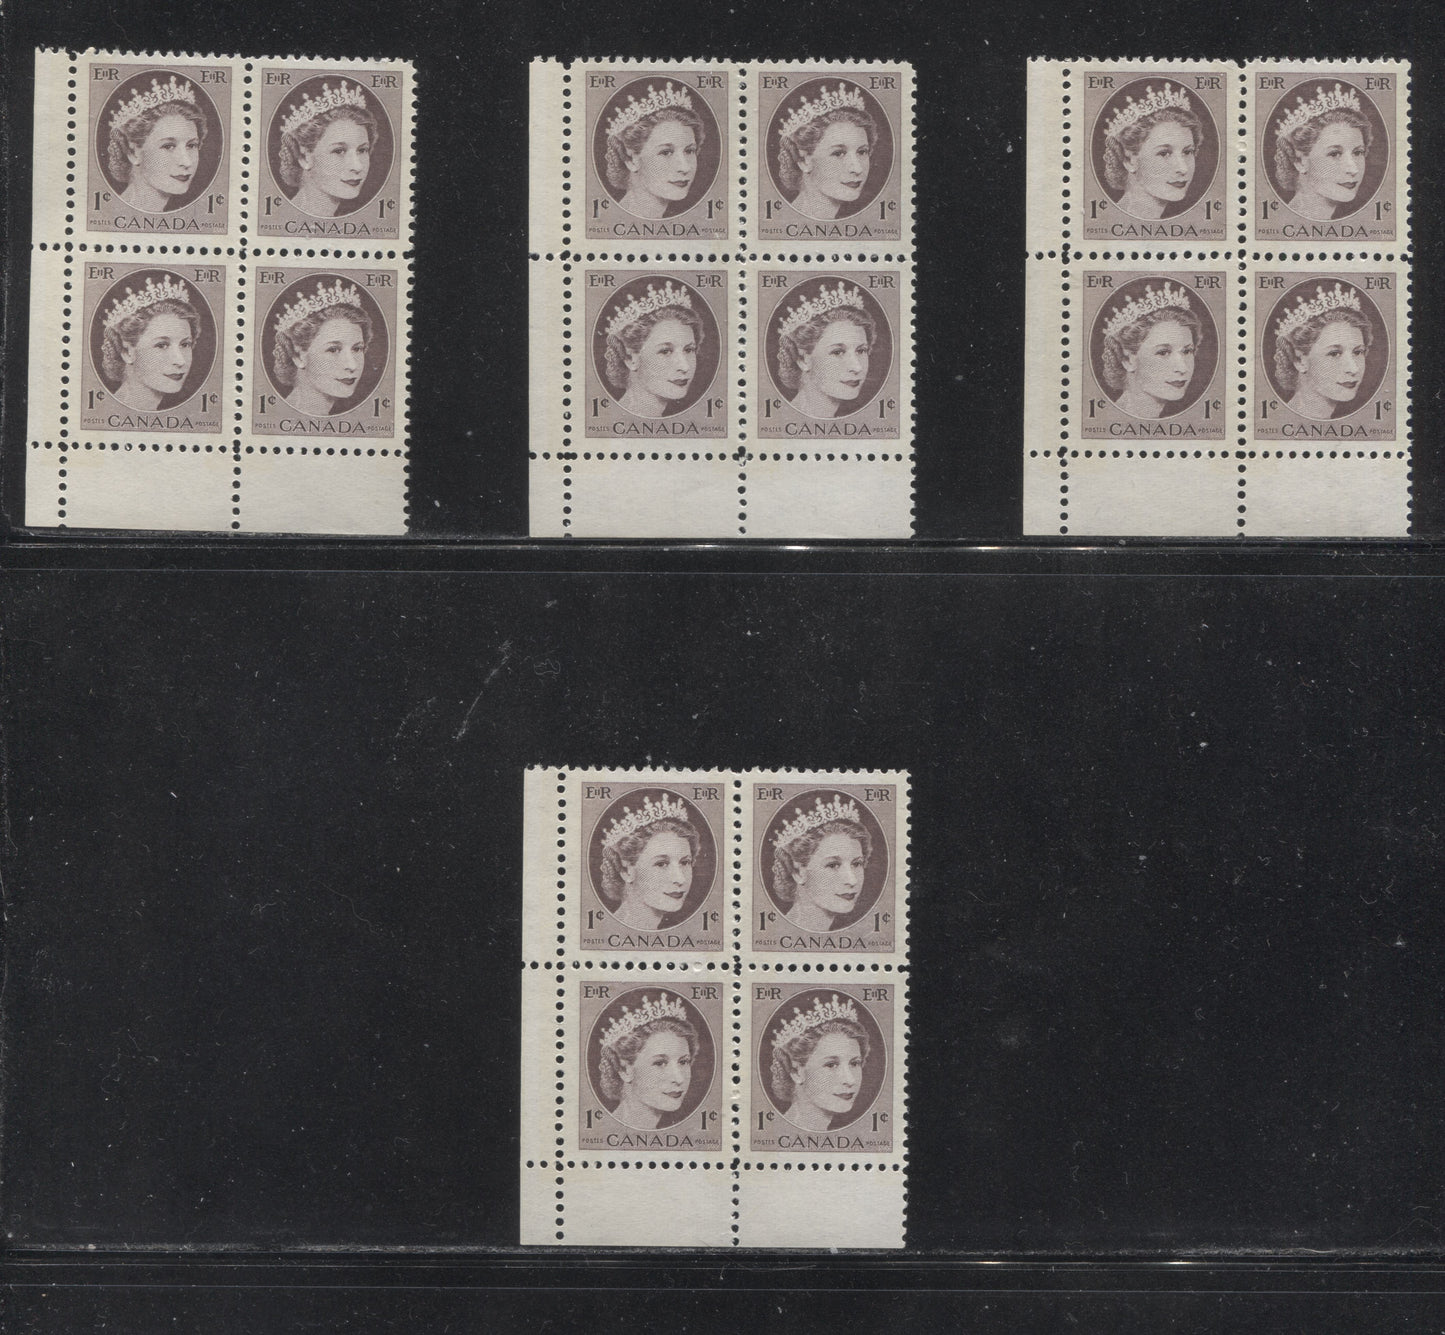 Canada #337p 1c Chocolate Queen Elizabeth II, 1954-1962 Wilding Issue, Lower Left Blank Winnipeg Tagged Blocks of 4, Four Different, Various Perfs., DF Gr Vertically Ribbed Paper, Streaky Semi Gloss Gum, Bluish White Tagging With Additional Tagging, VFNH Brixton Chrome 